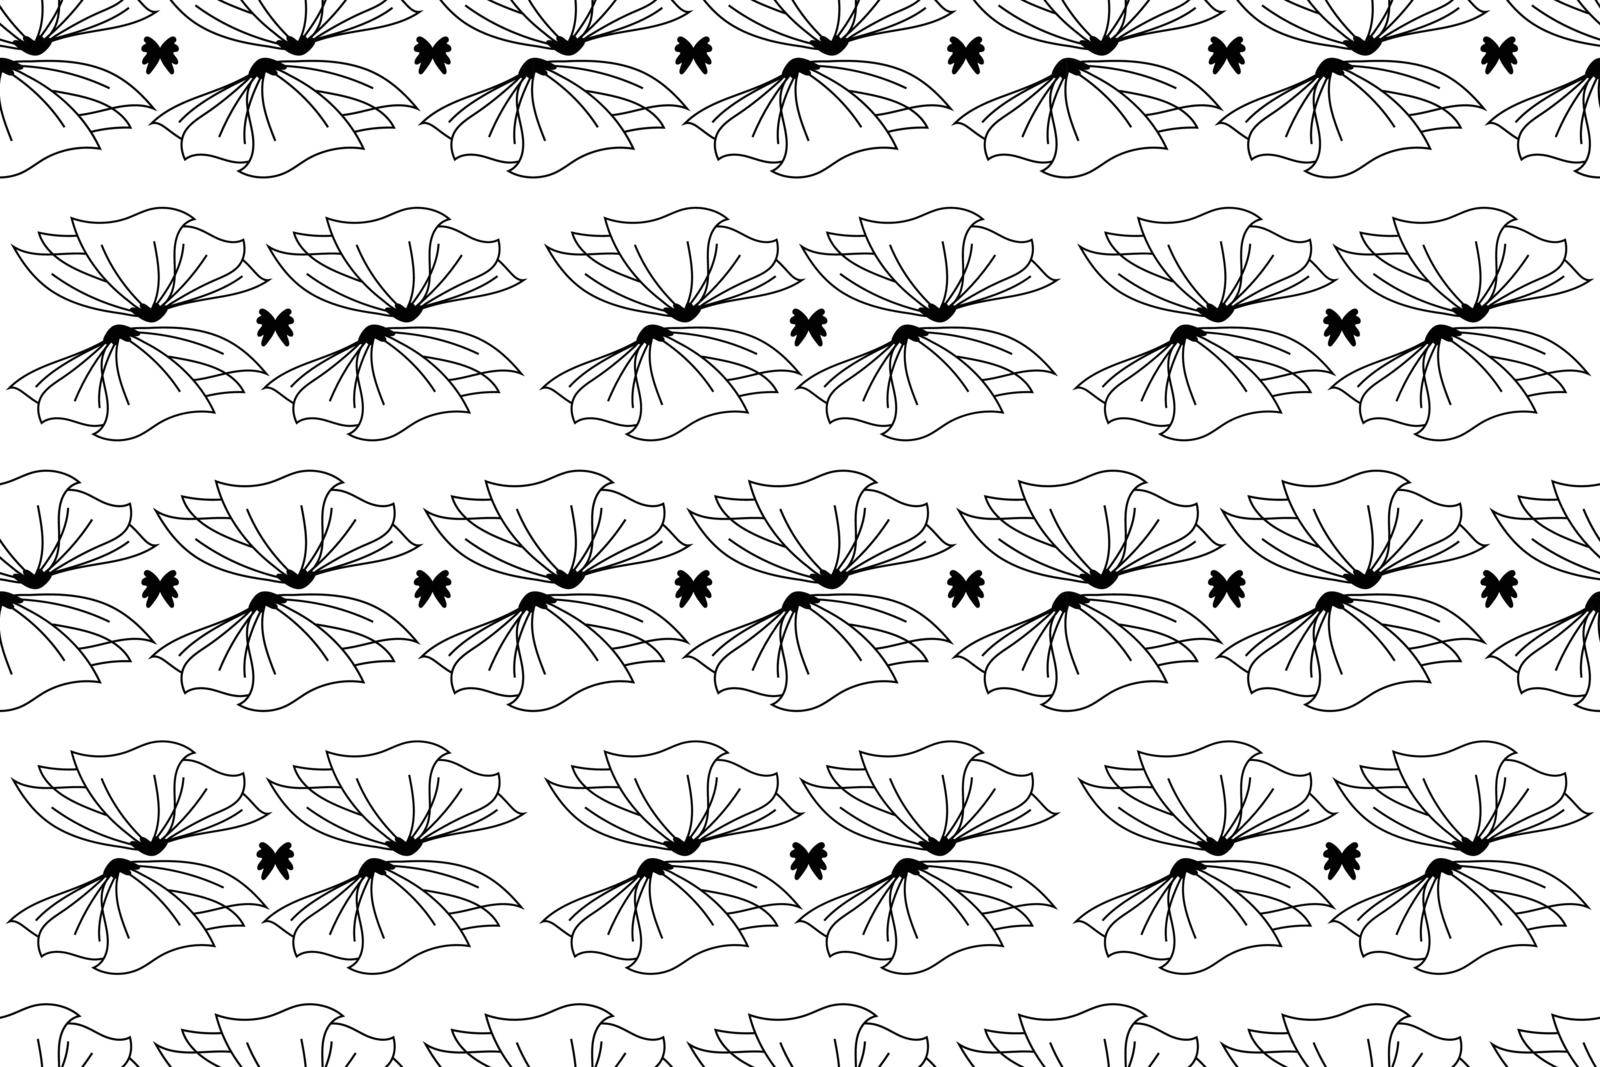 Wallpaper in the style of Zen. Seamless vector background. Black and white floral ornament. Graphic pattern for fabric, wallpaper, packaging. Ornate Zen flower ornament. Vector illustration